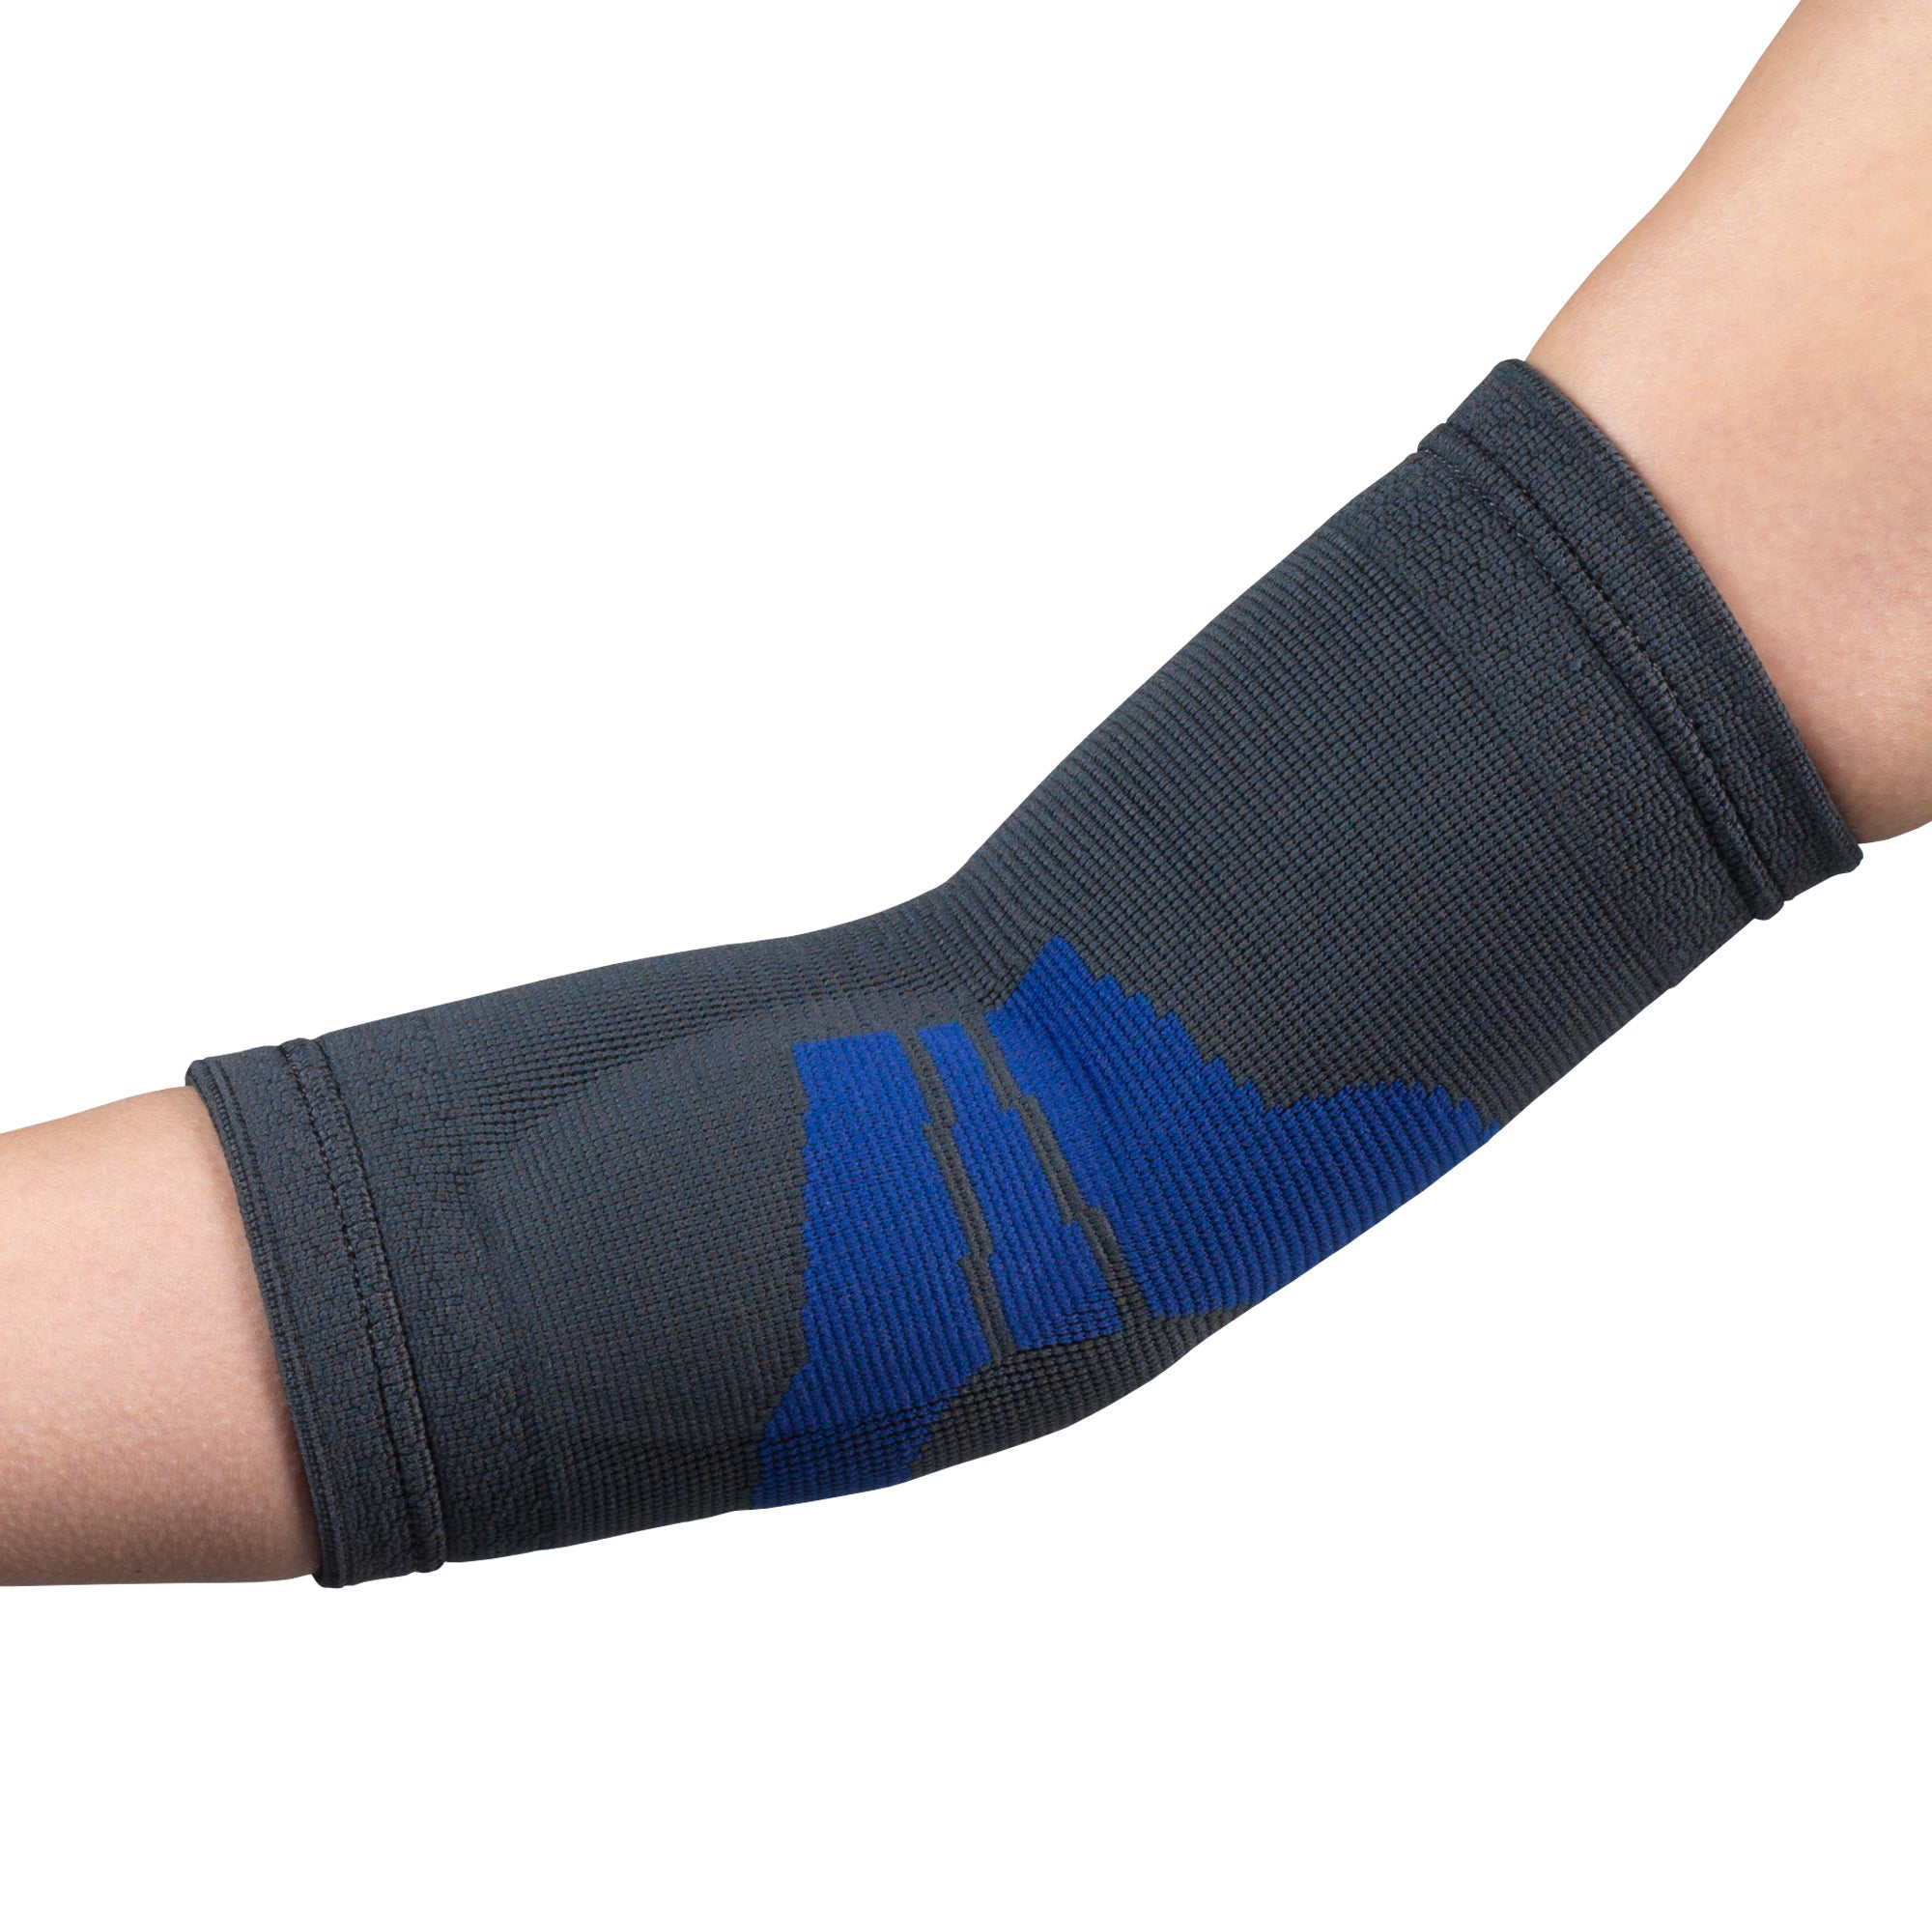 --Side of ELBOW SUPPORT WITH COMPRESSION GEL INSERT--